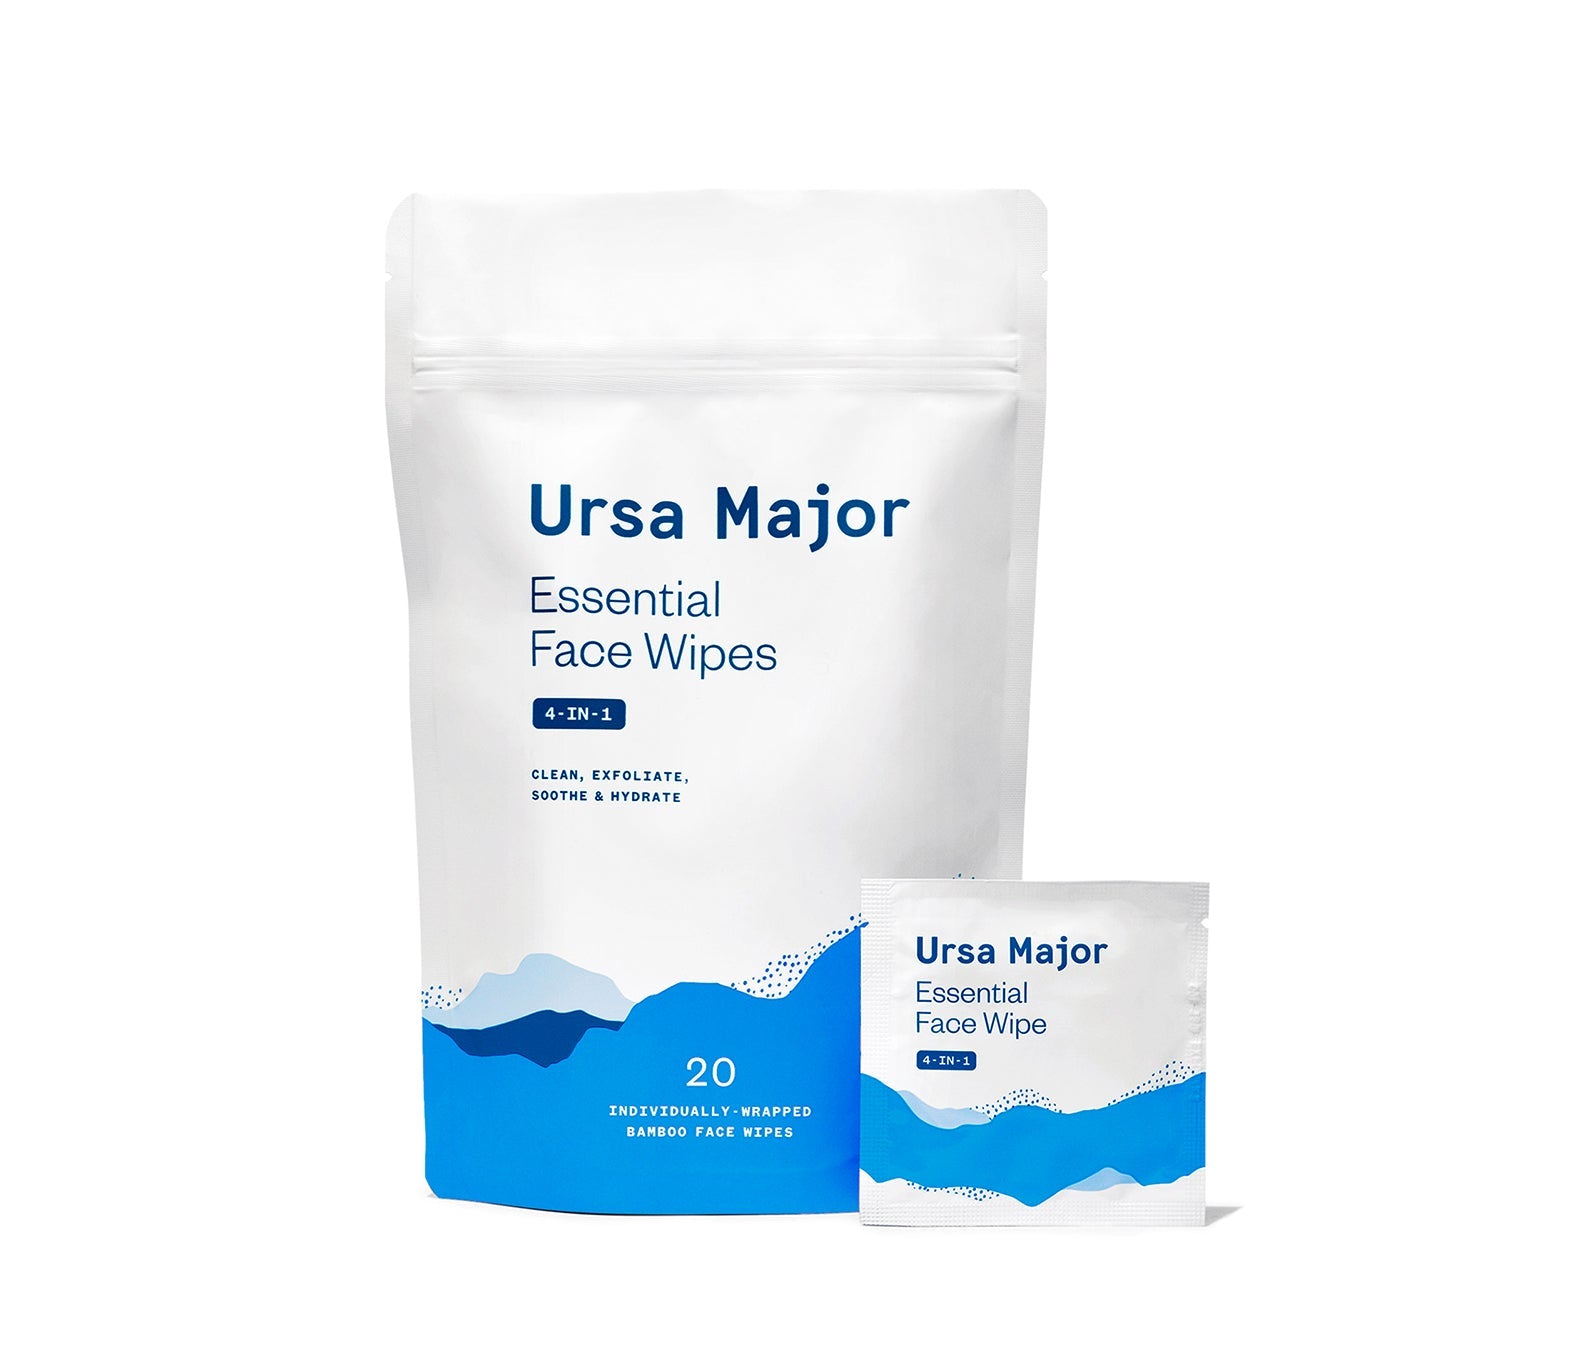 Blue and white packaging for 4-in-1 Essential Face Wipes by Ursa Major Skincare